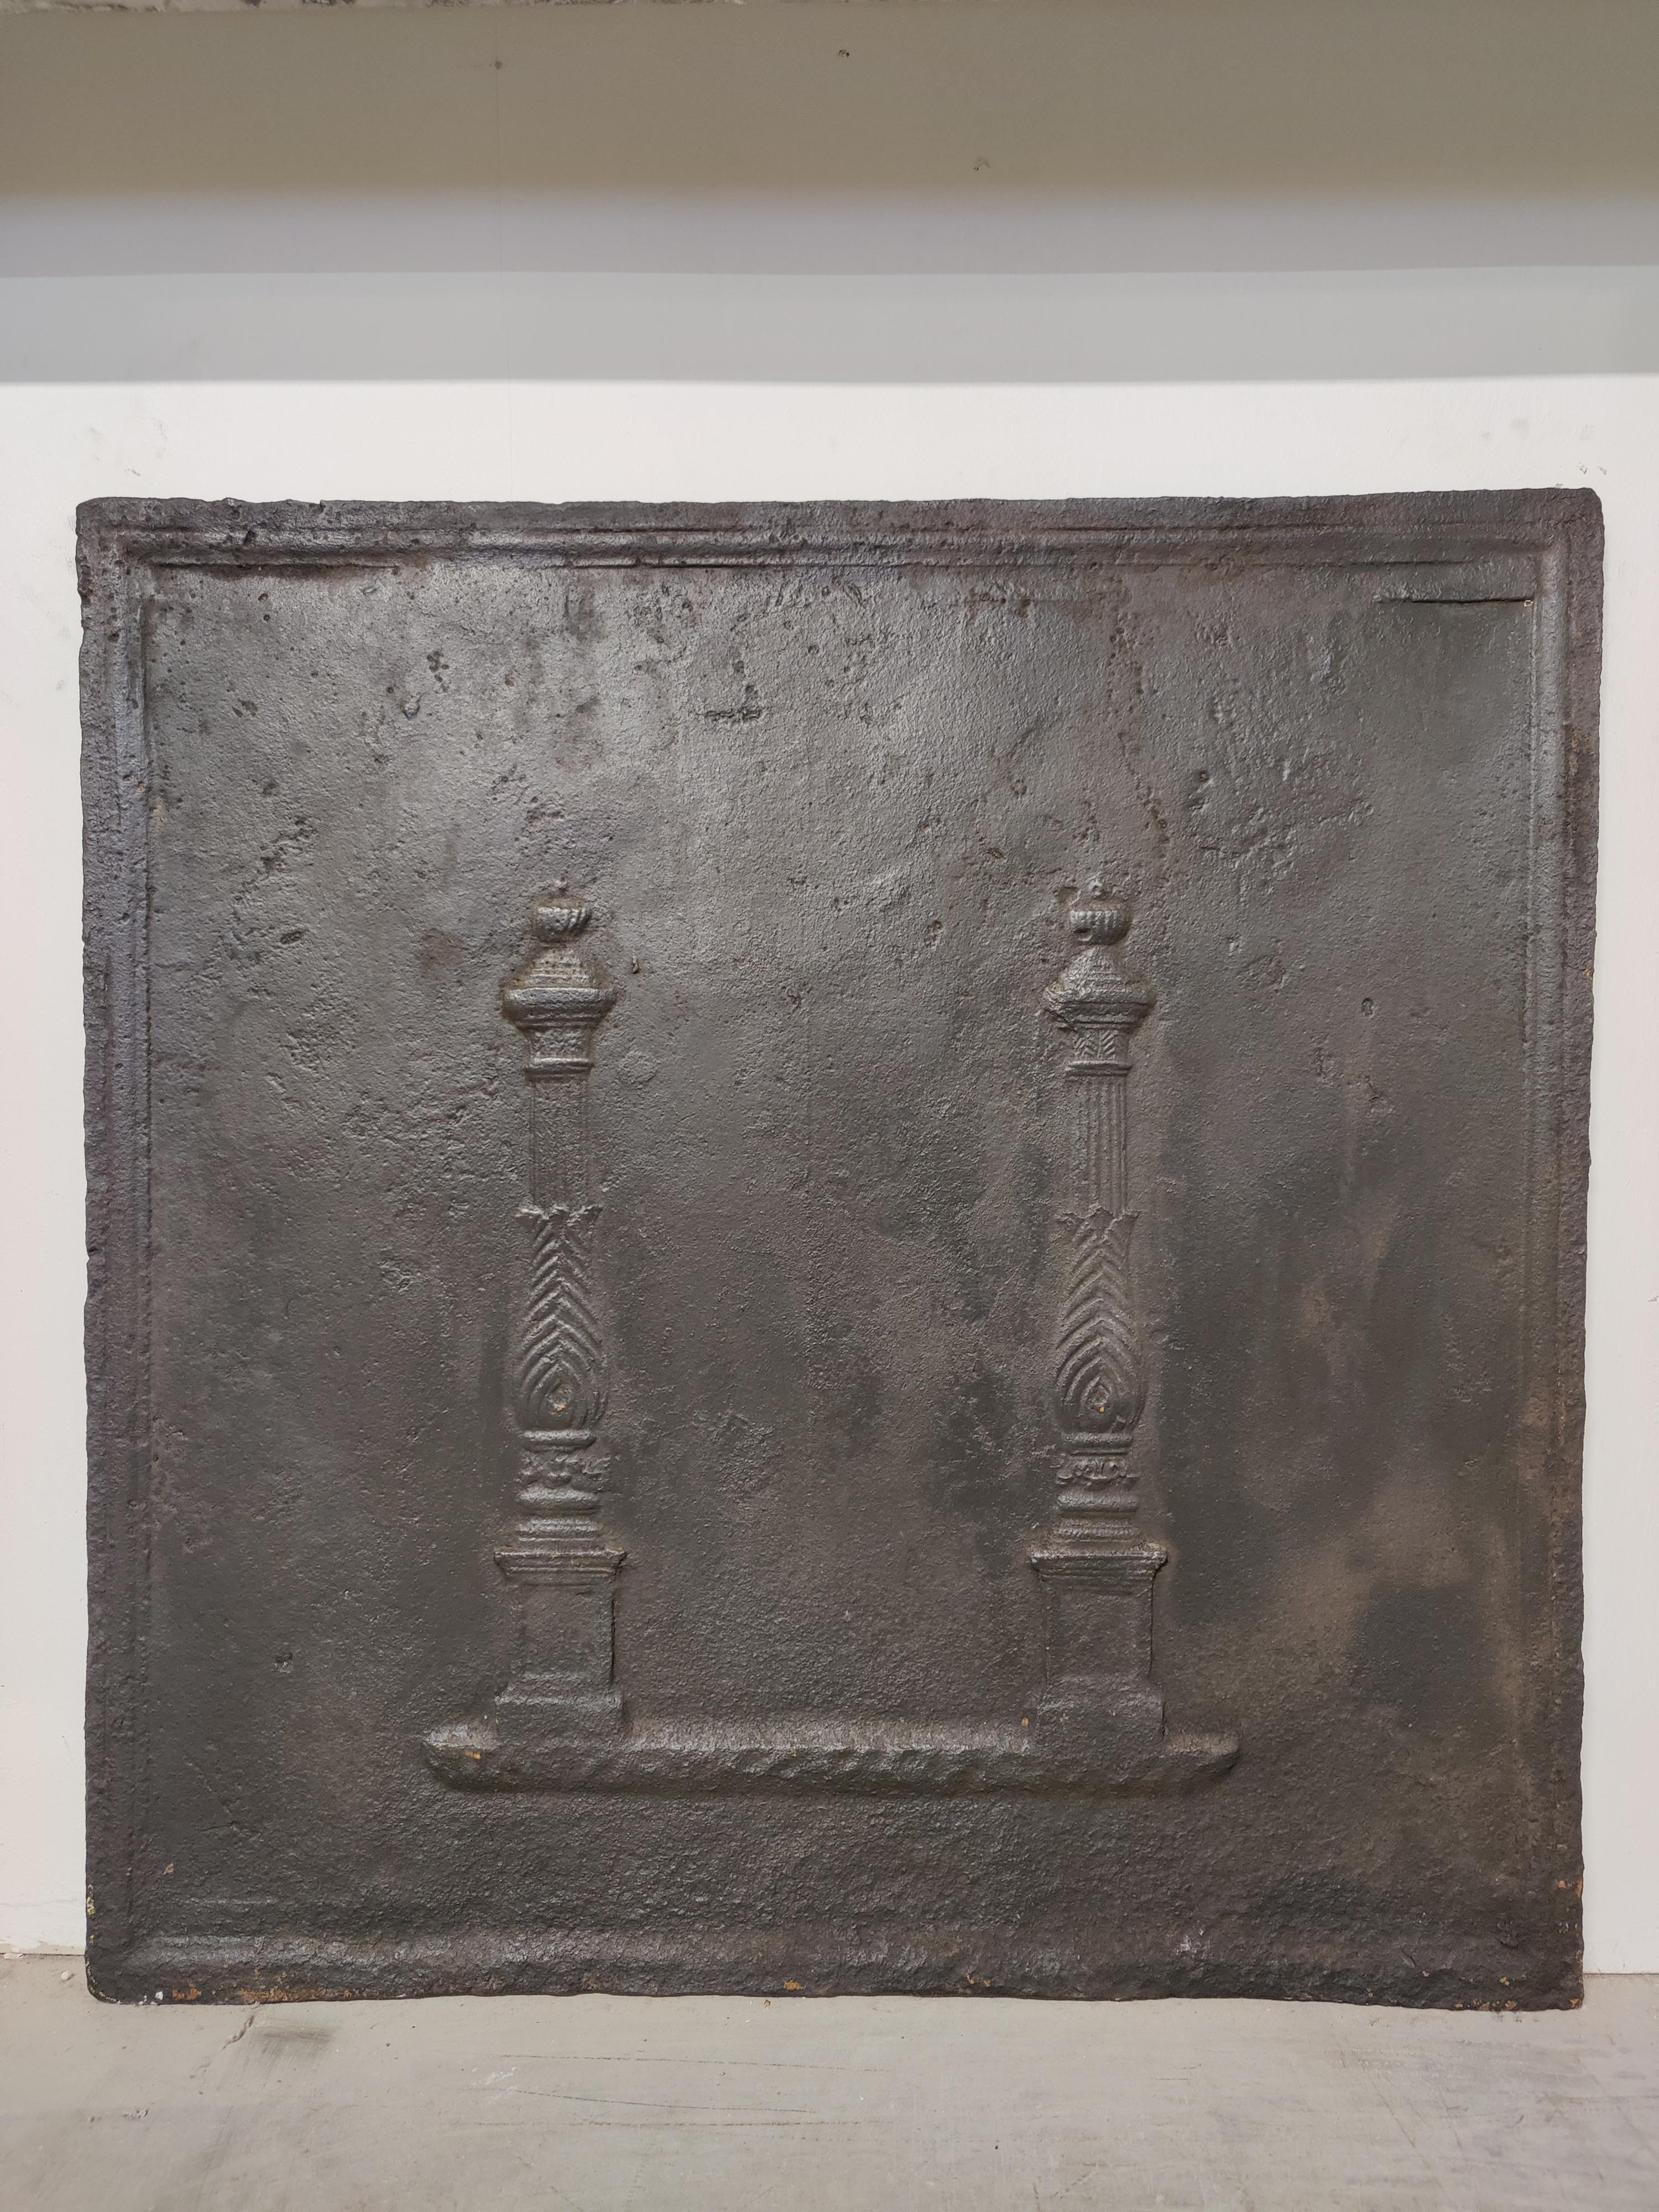 Antique fireback / backsplash, profiled pillars.

Nice square cast iron antique fireback displaying two nicely decorated profiled pillars.
Great condition, can be used in a real gas or log fire.
Very decorative piece.
126 lbs / 57 kg.